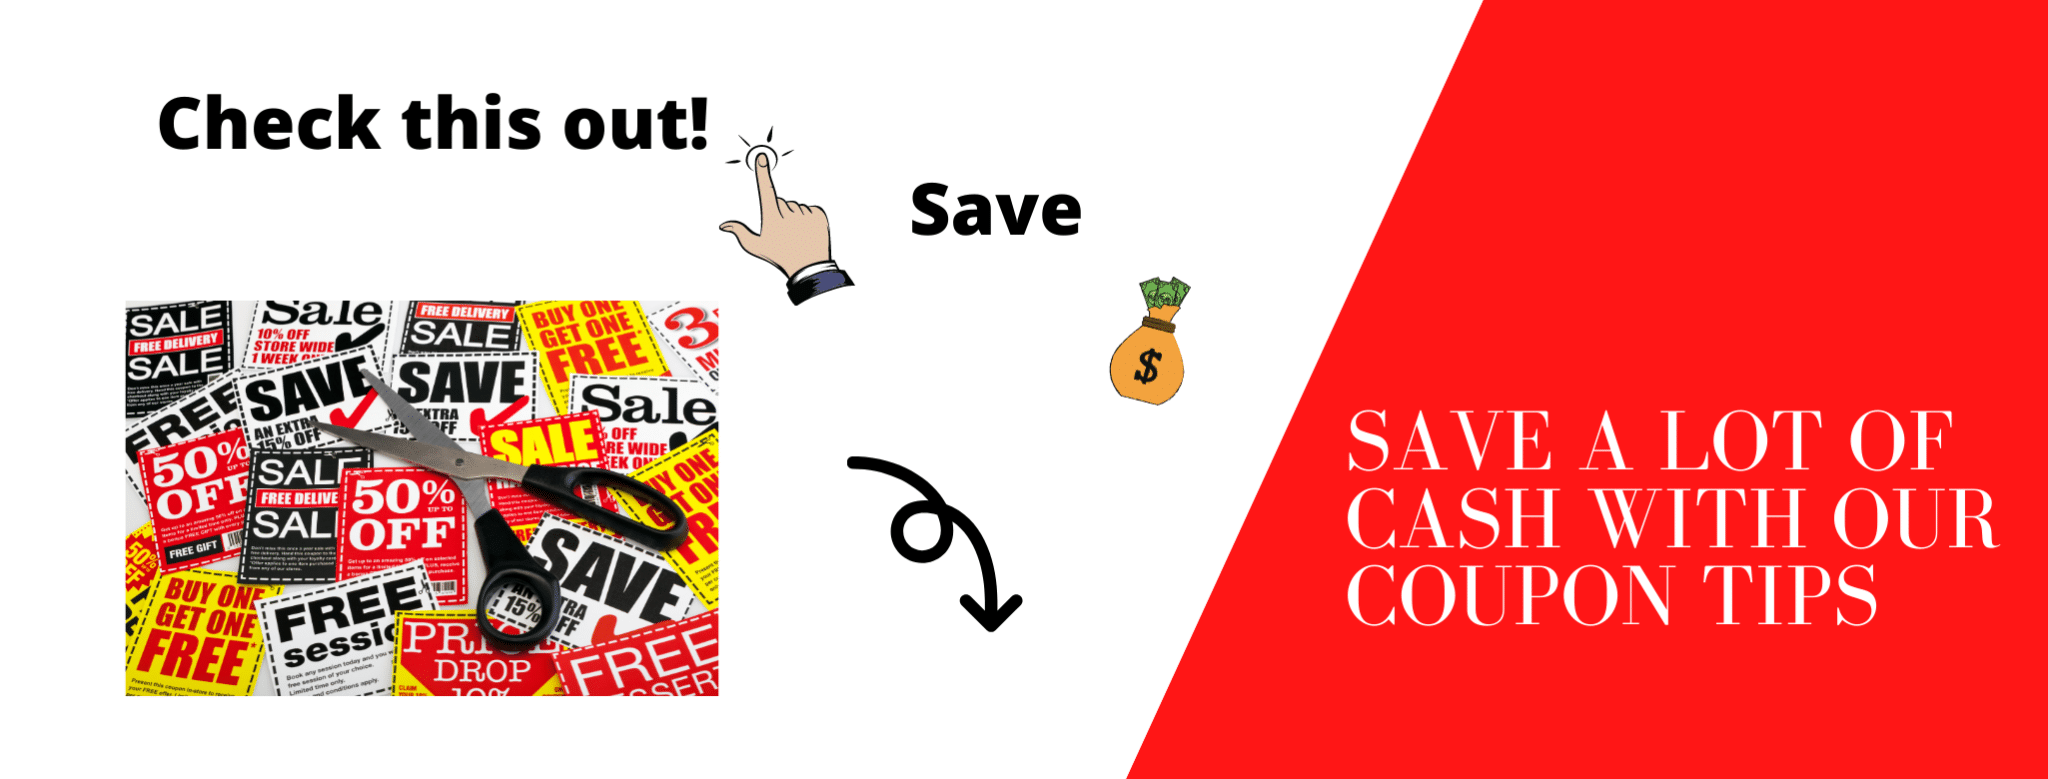 Save A Lot Of Cash With Our Coupon Tips